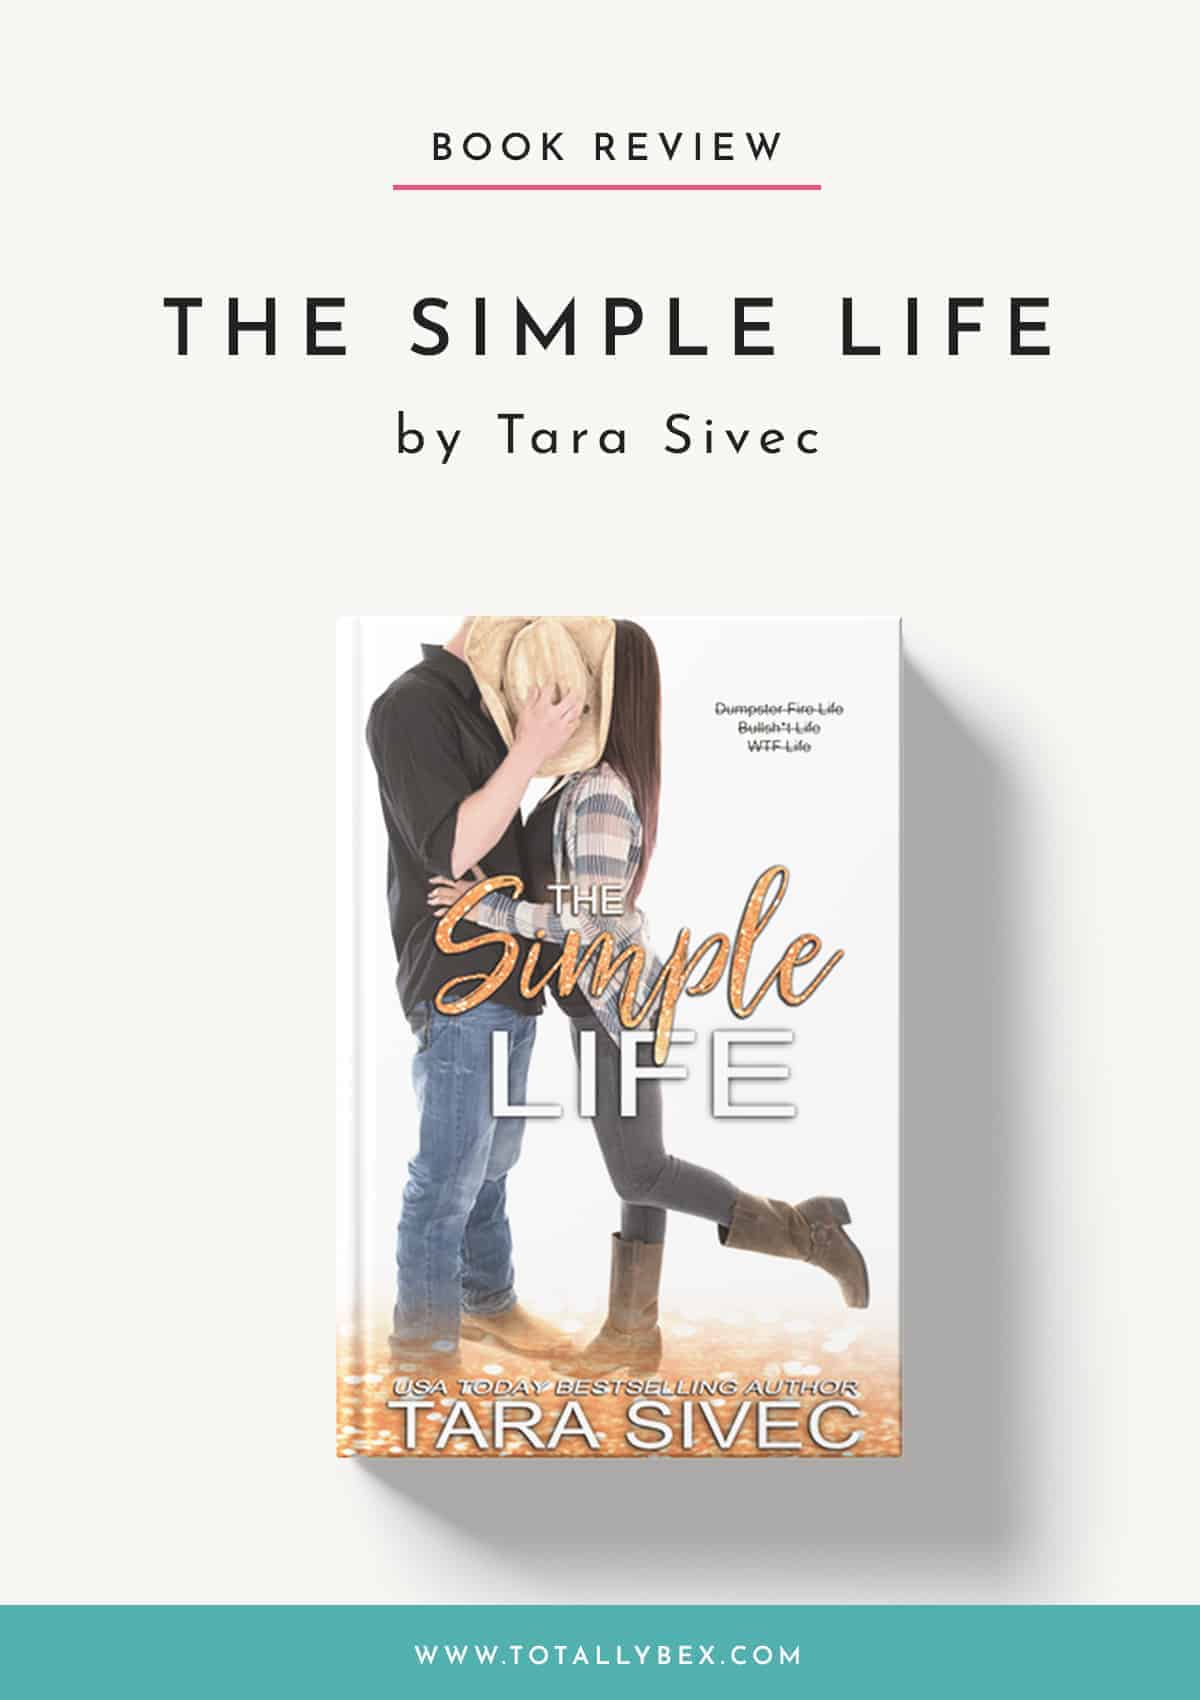 The Simple Life by Tara Sivec-Book Review